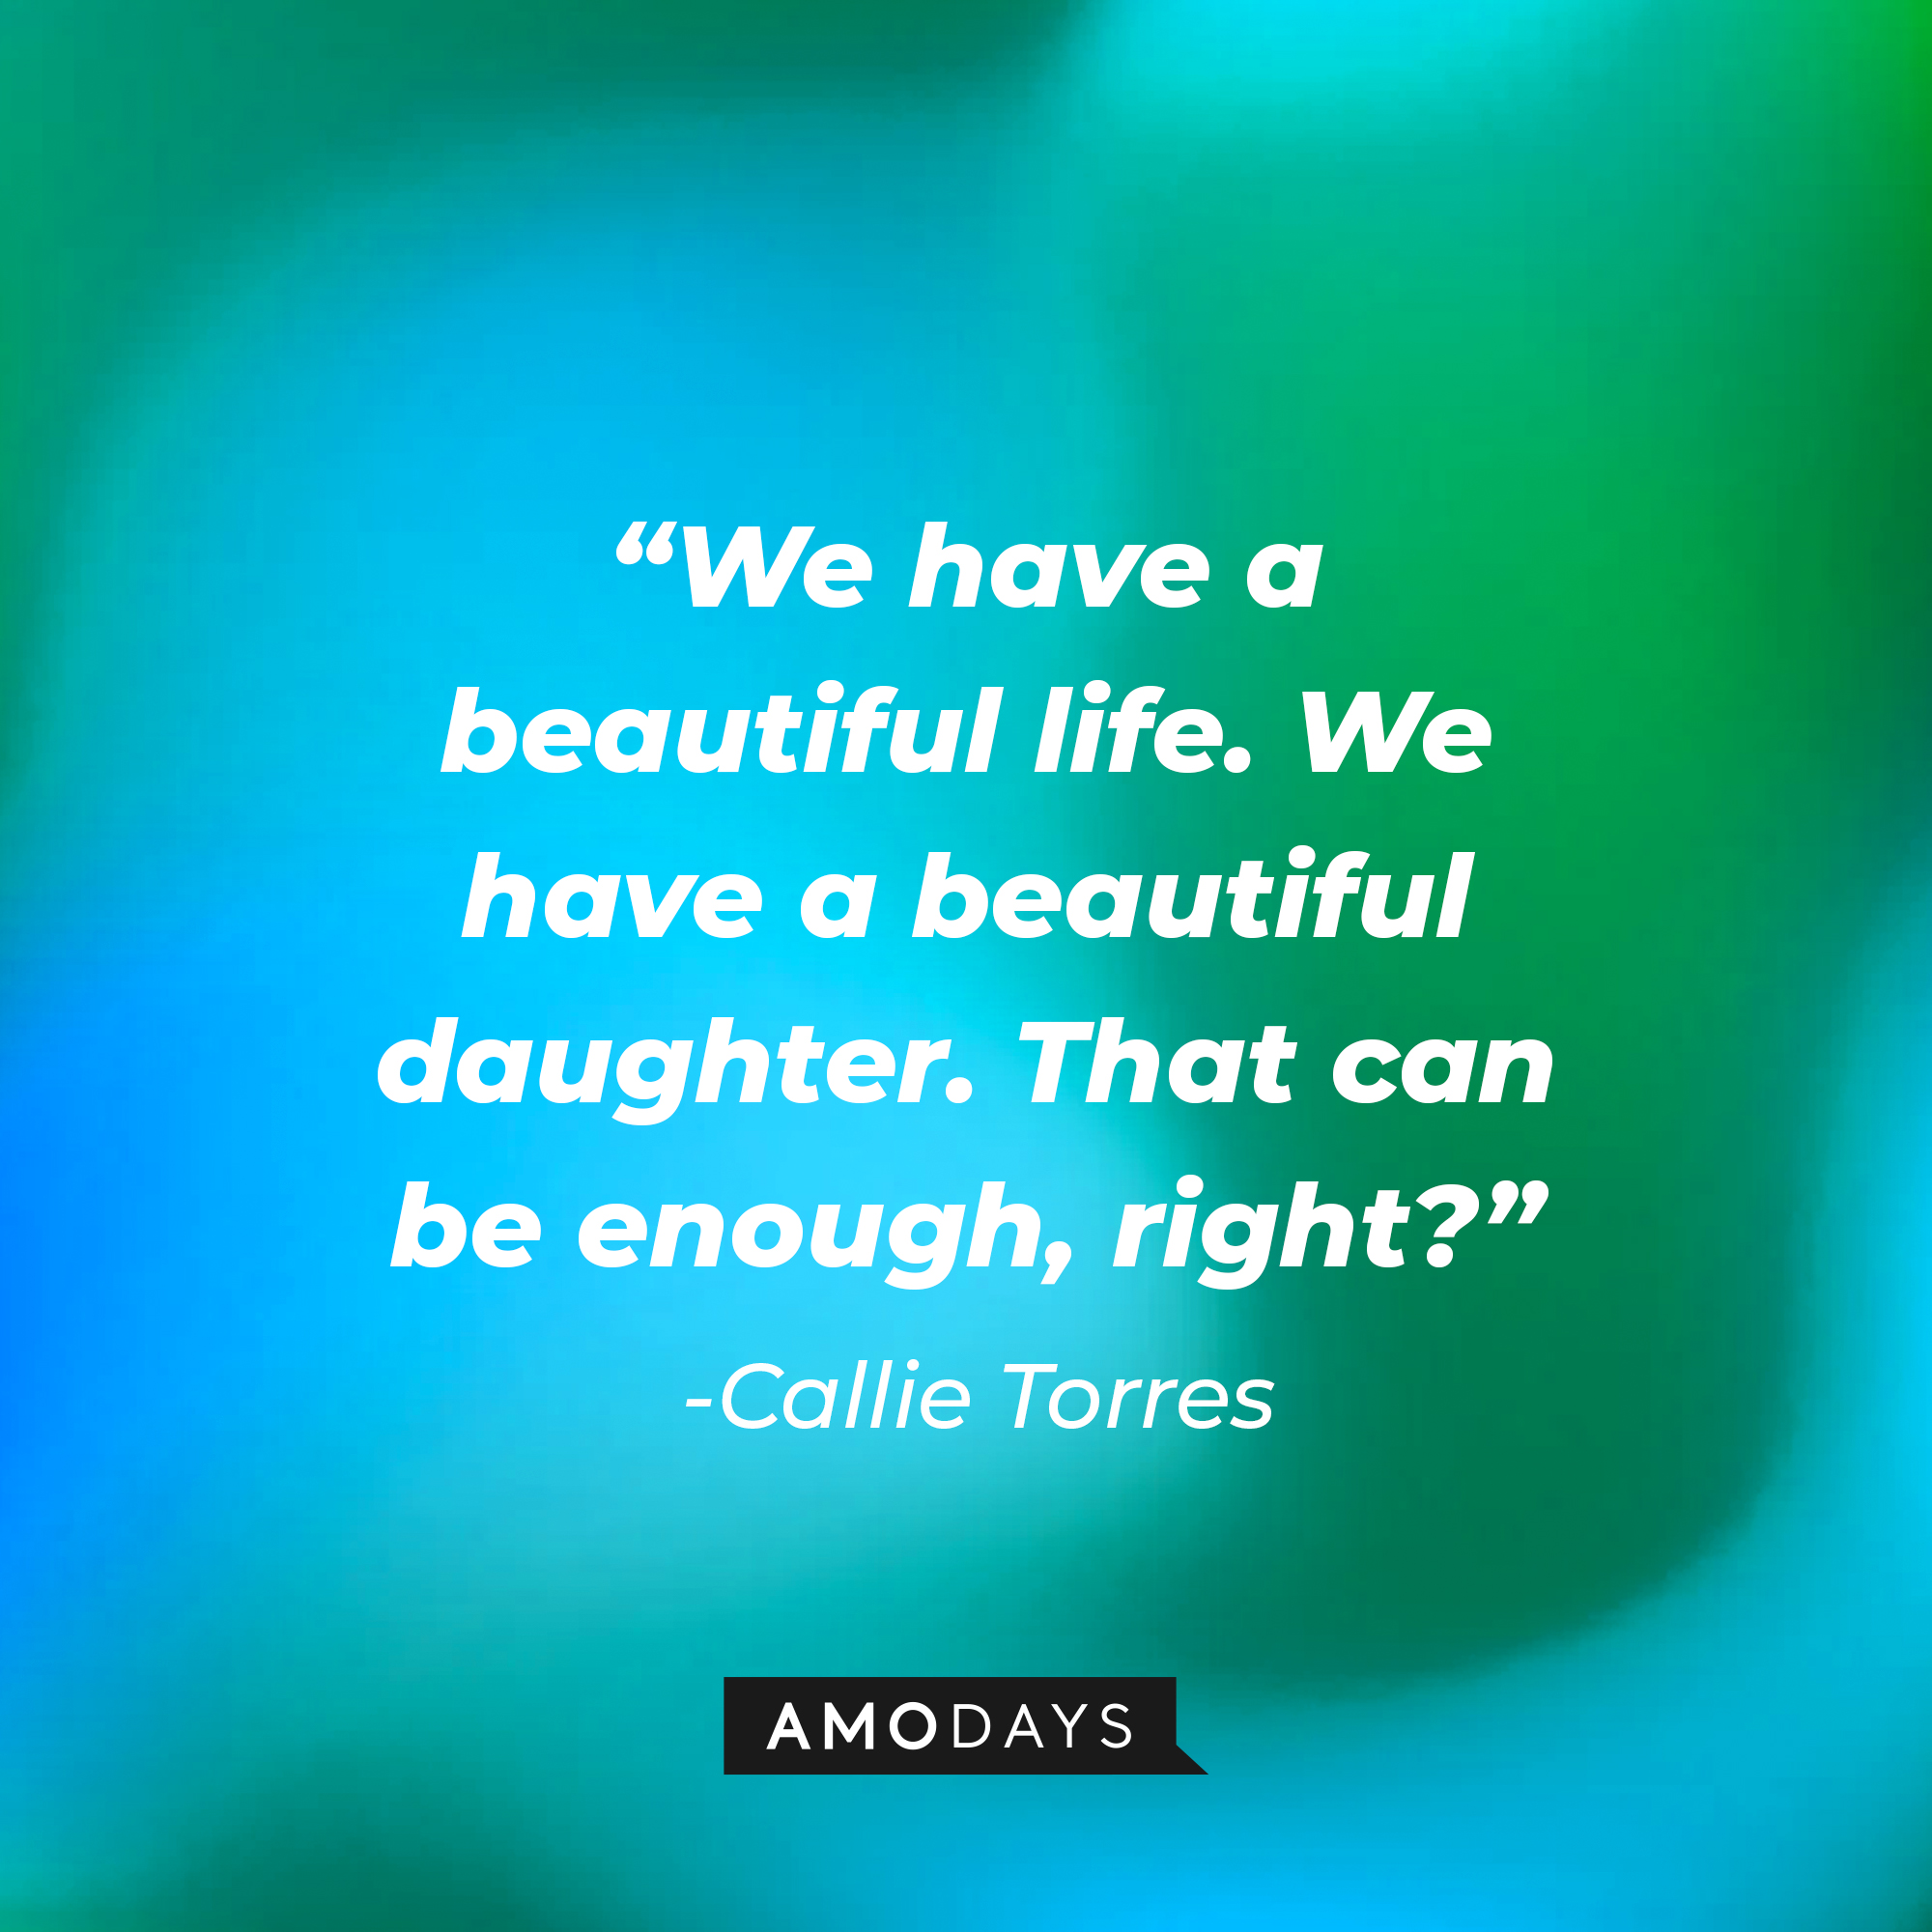 Callie Torres’ quote: “We have a beautiful life. We have a beautiful daughter. That can be enough, right?” |  Source: youtube.com/ABCNetwork